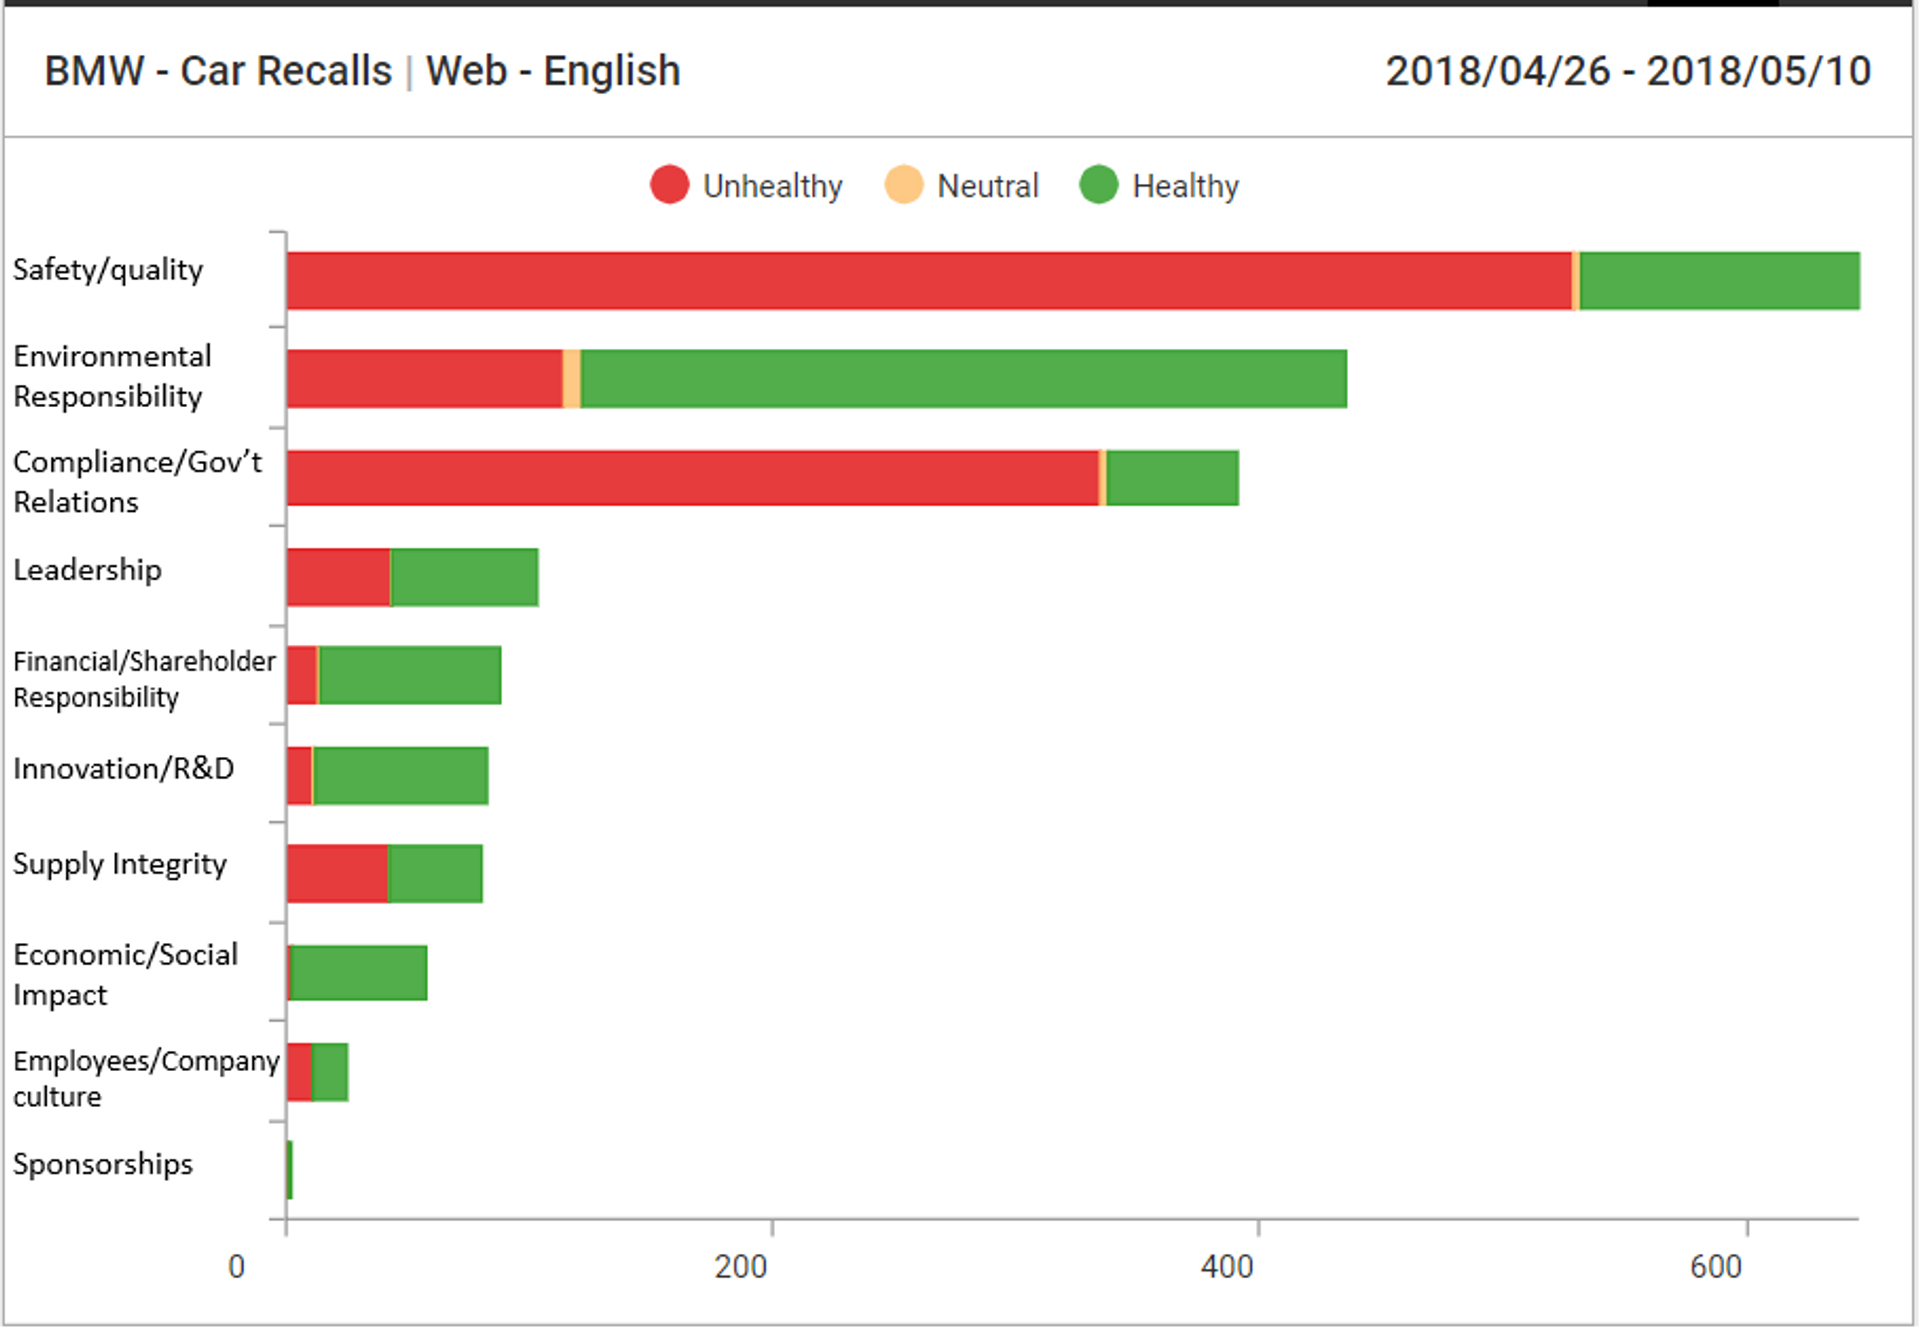 A chart showing the top reputational issues for BMW regarding recalls, broken down by sentiment